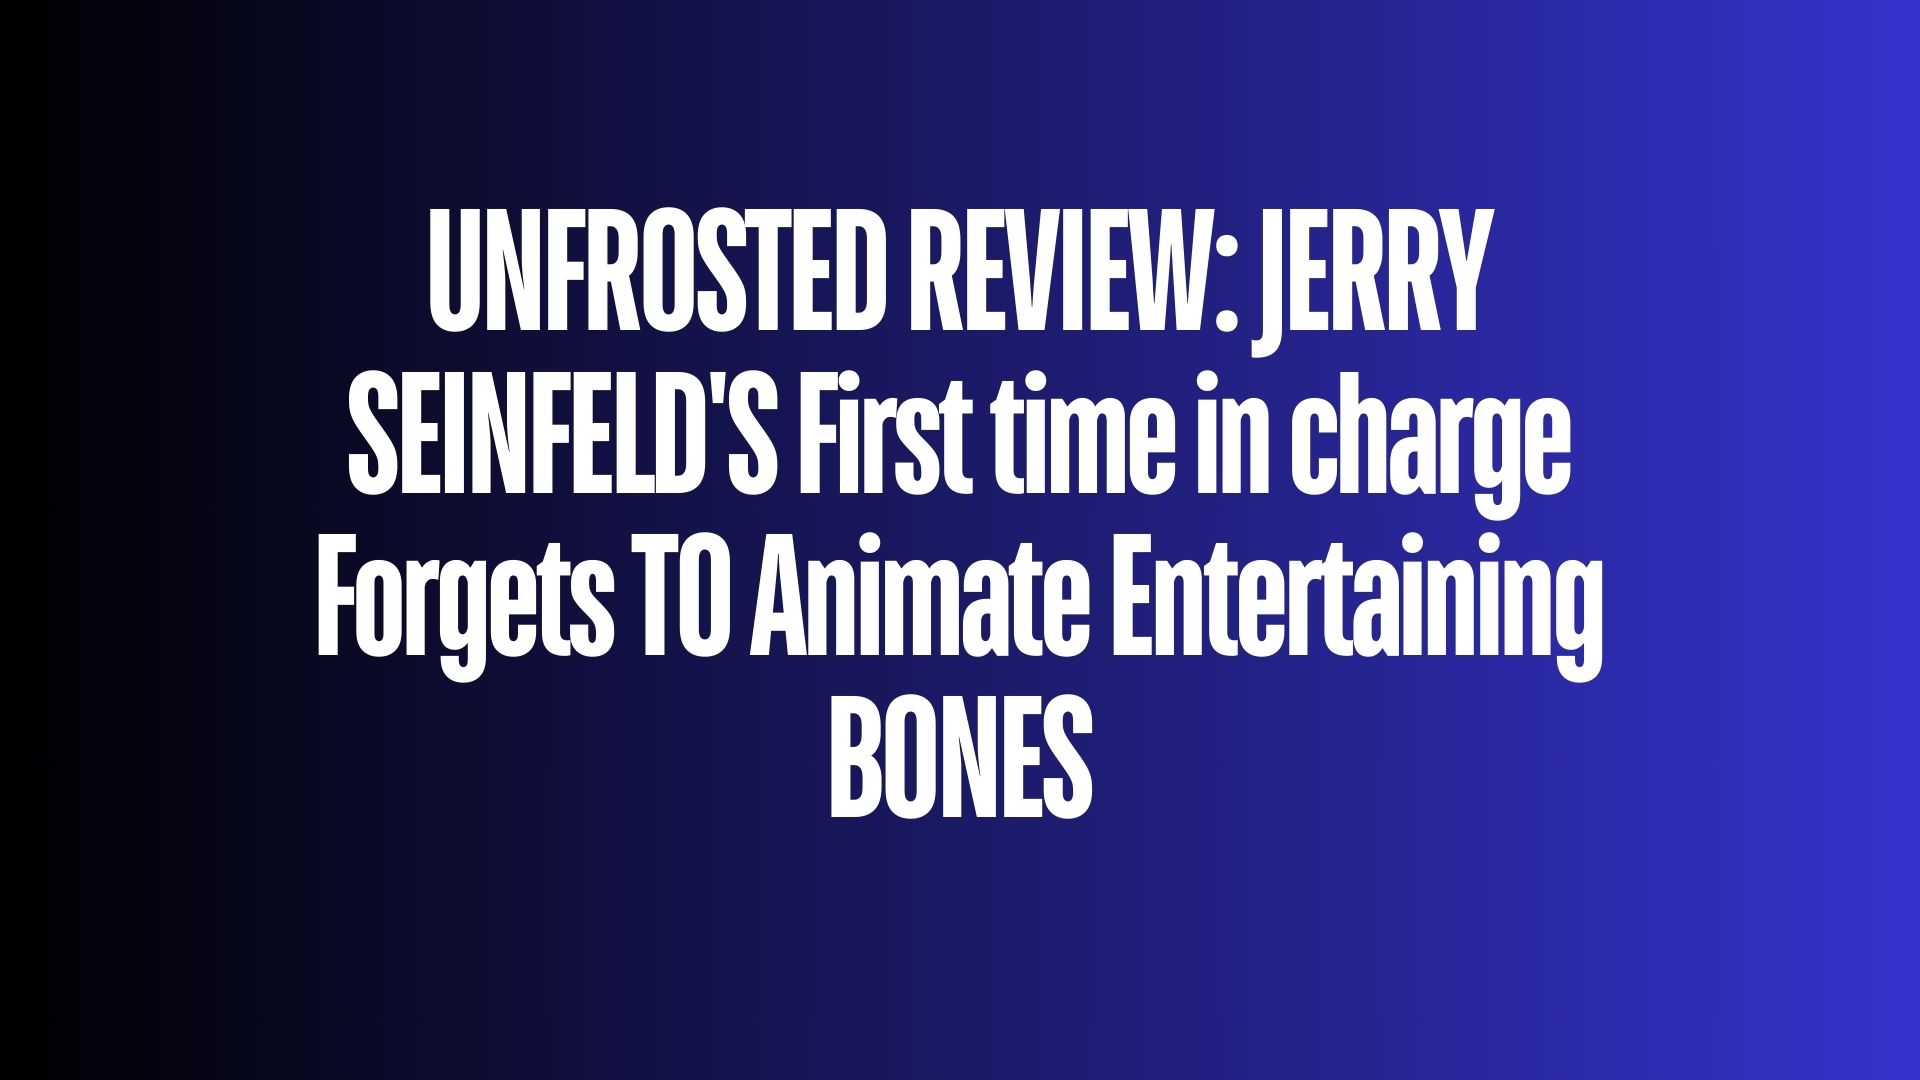 UNFROSTED REVIEW:  JERRY SEINFELD'S First time in charge Forgets TO Animate Entertaining BONES